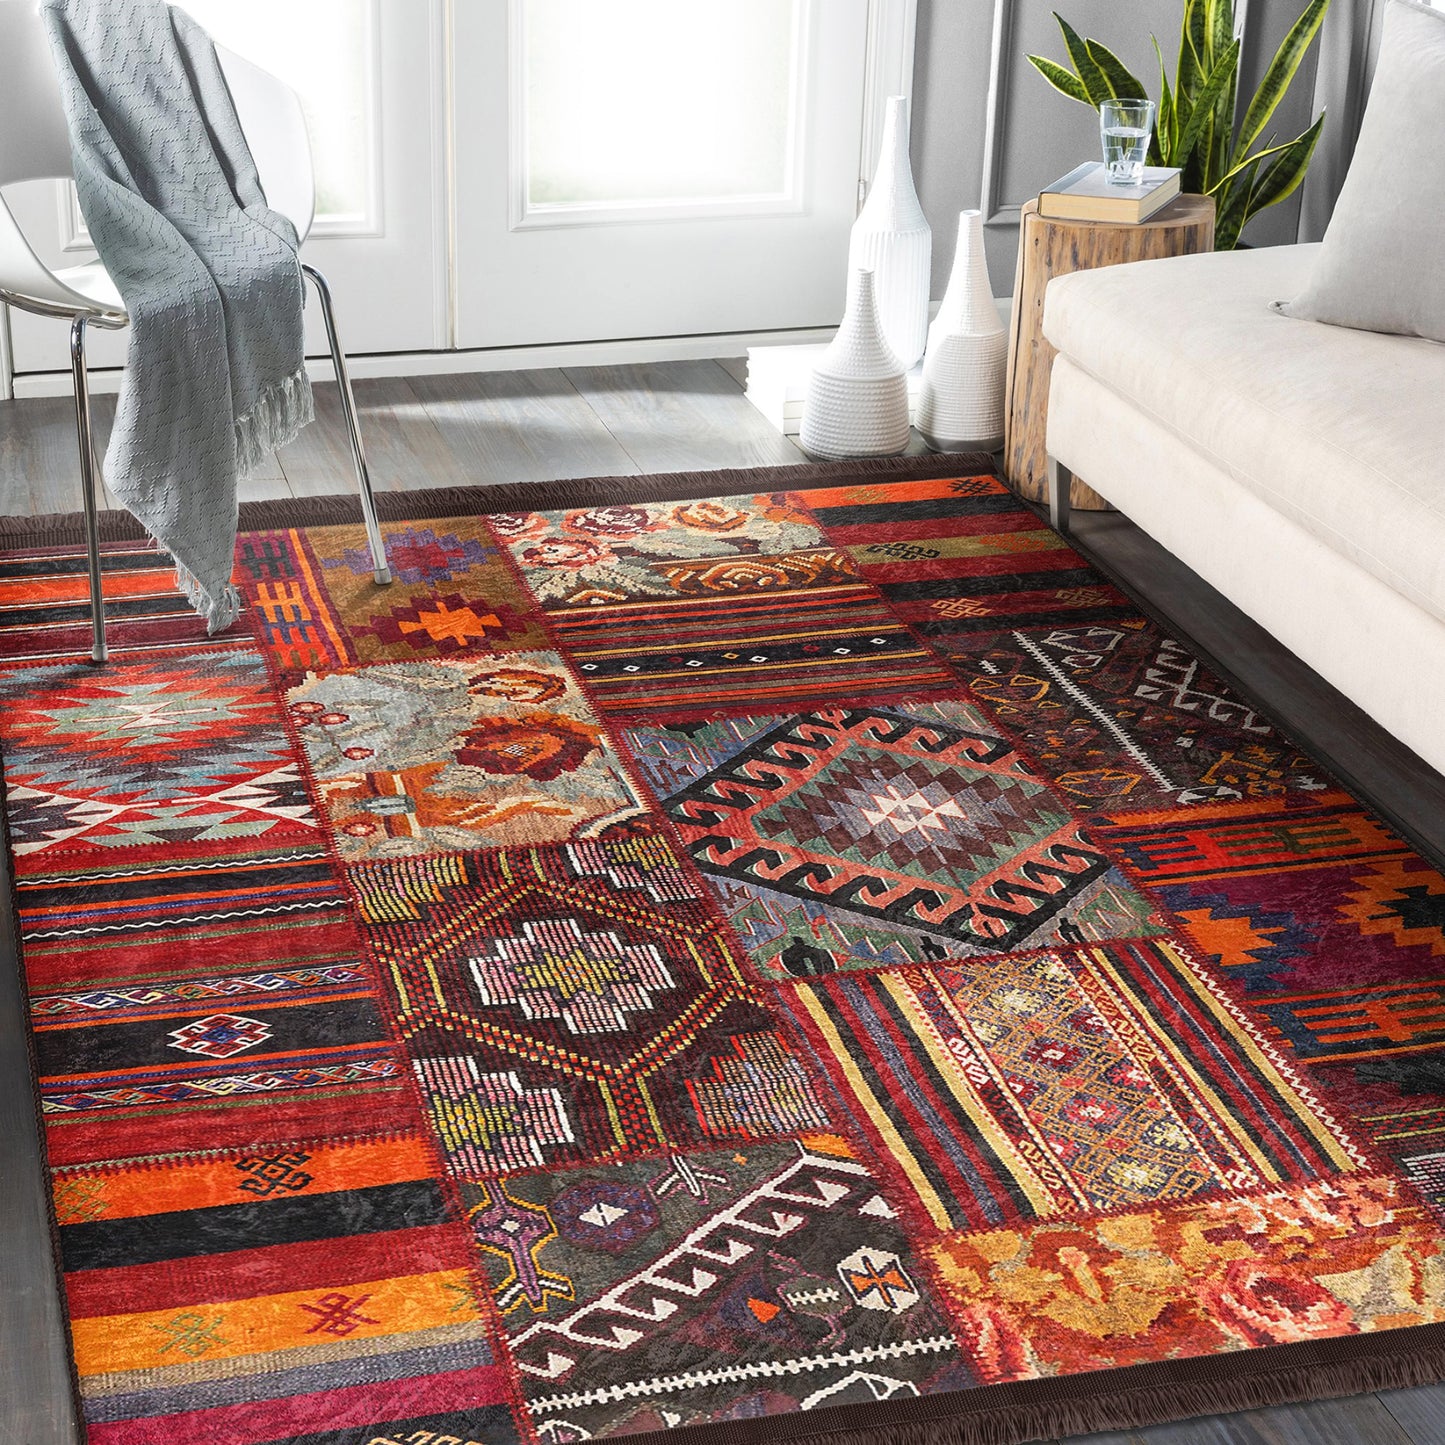 Functional and Stylish Home Decor Rug with Timeless Craftsmanship